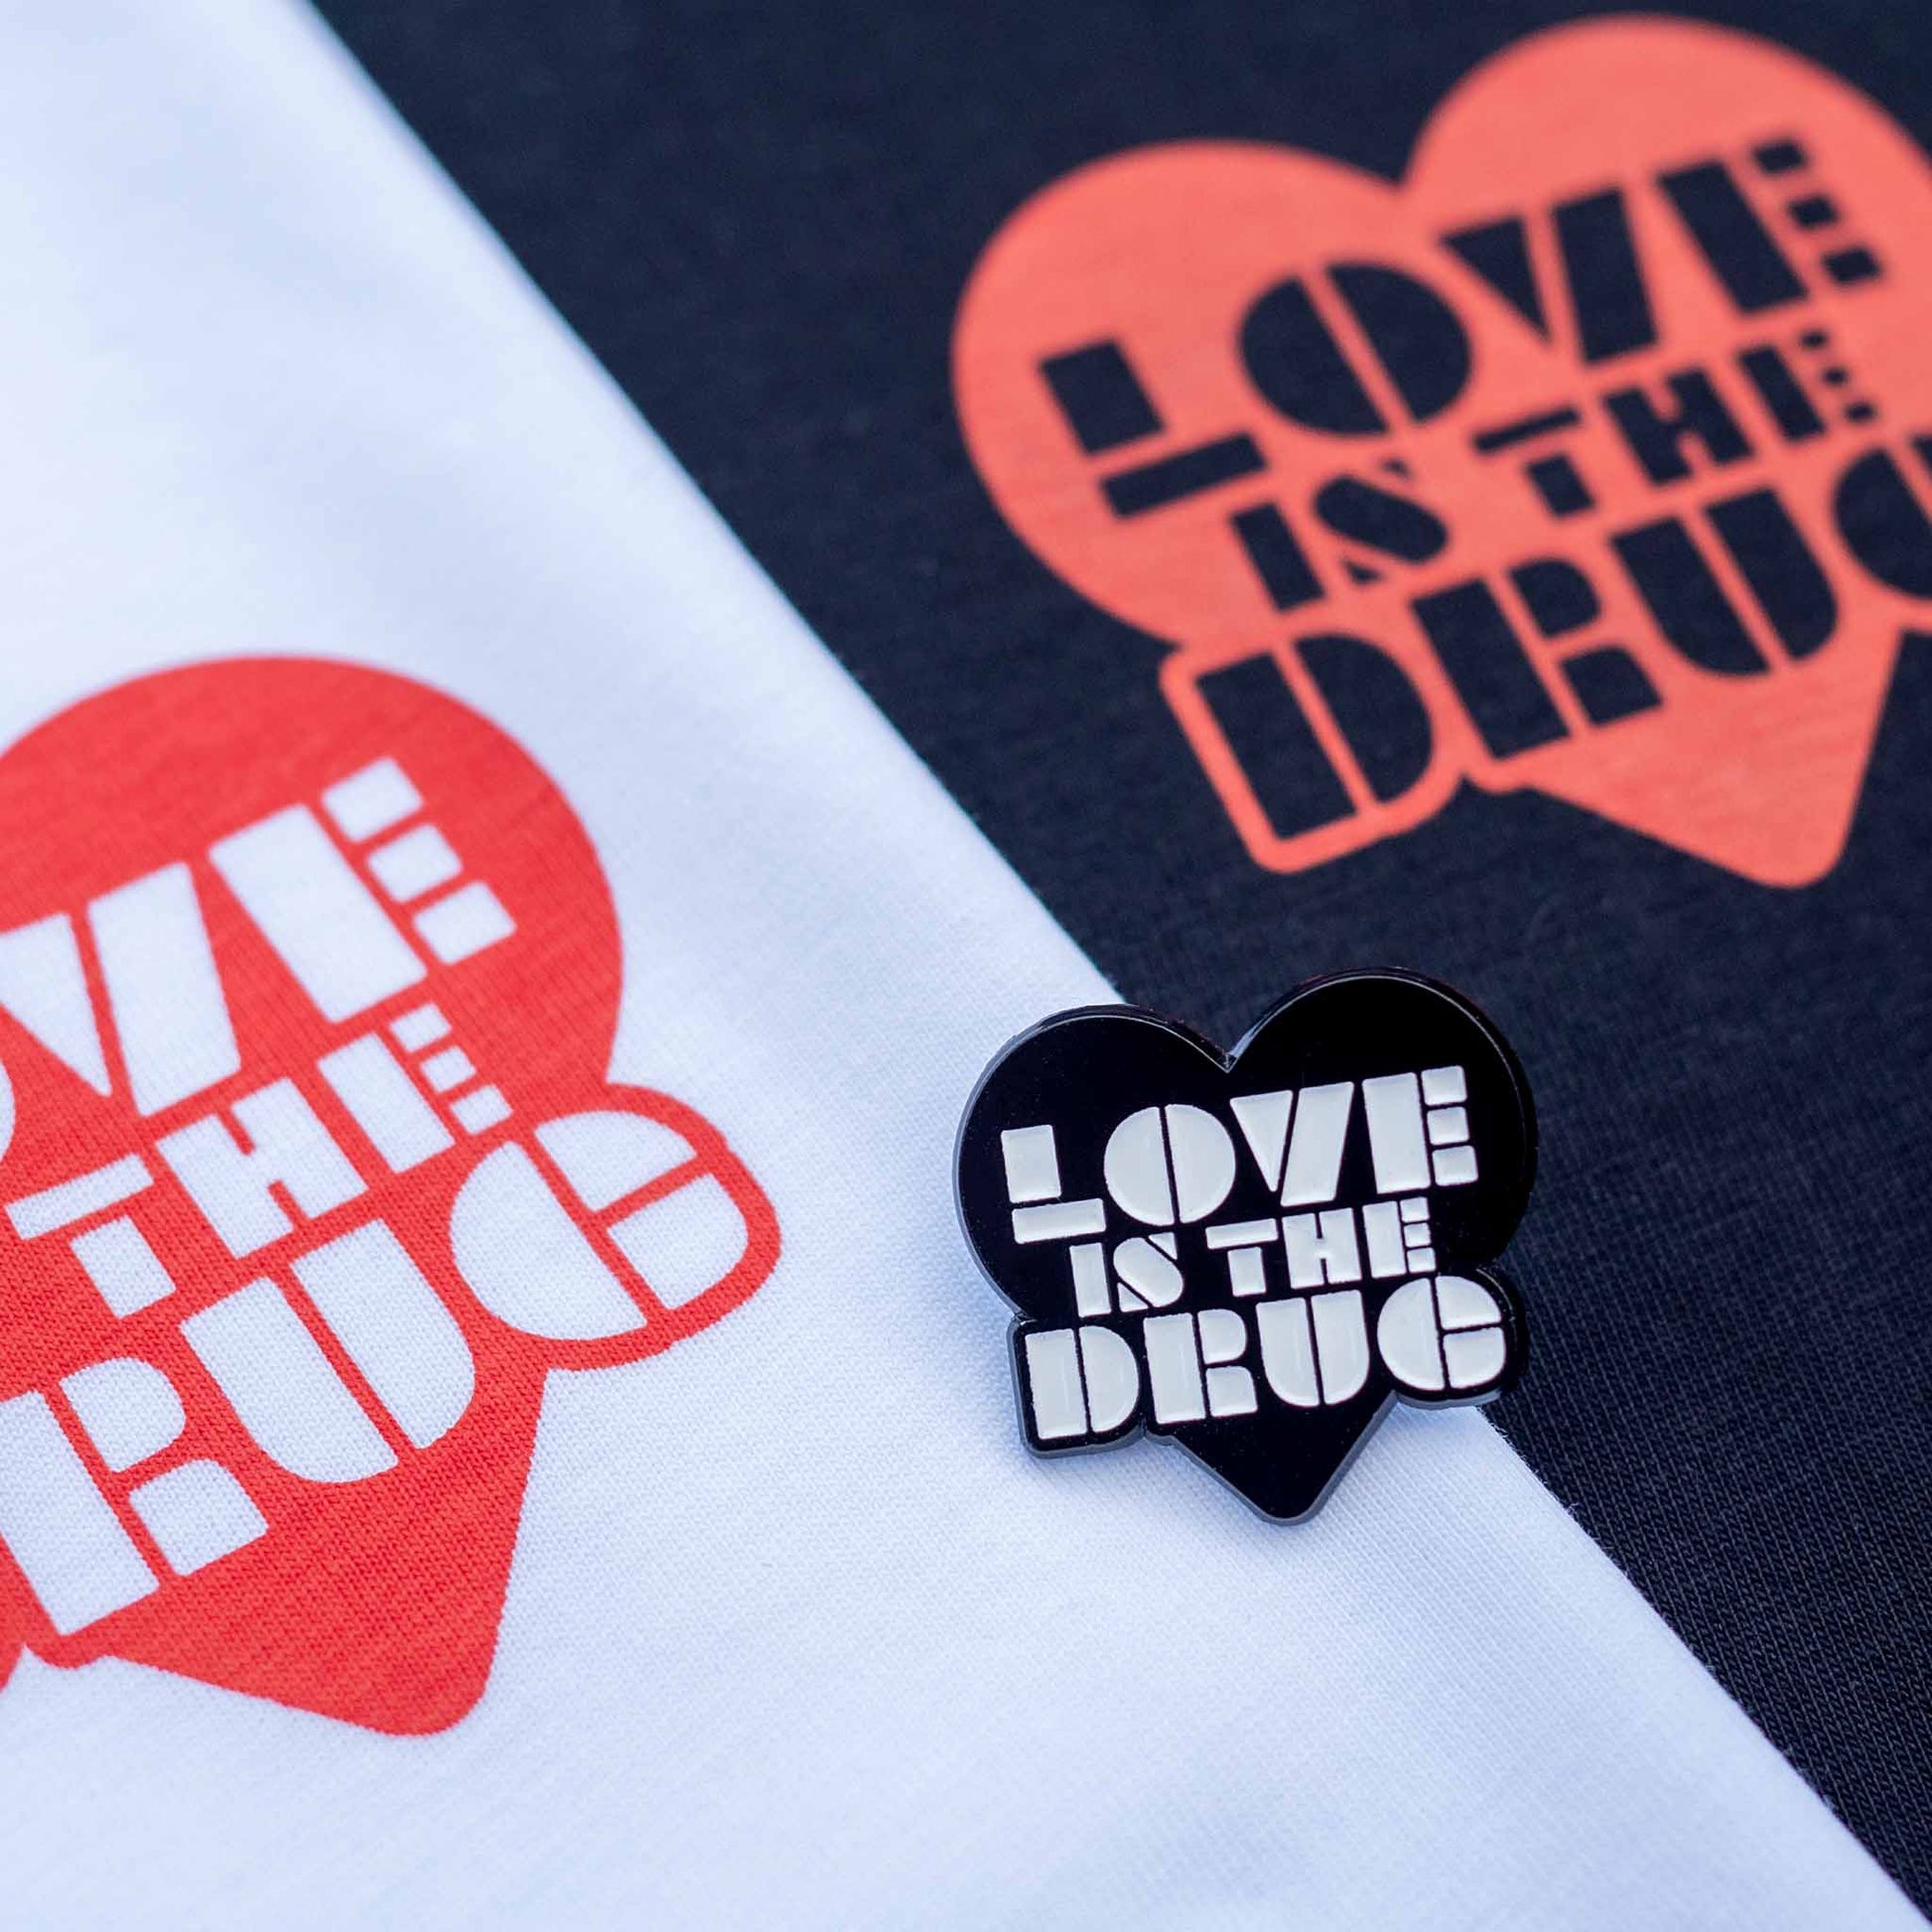 Red Love is the drug design on black or white tee and matching pin badge